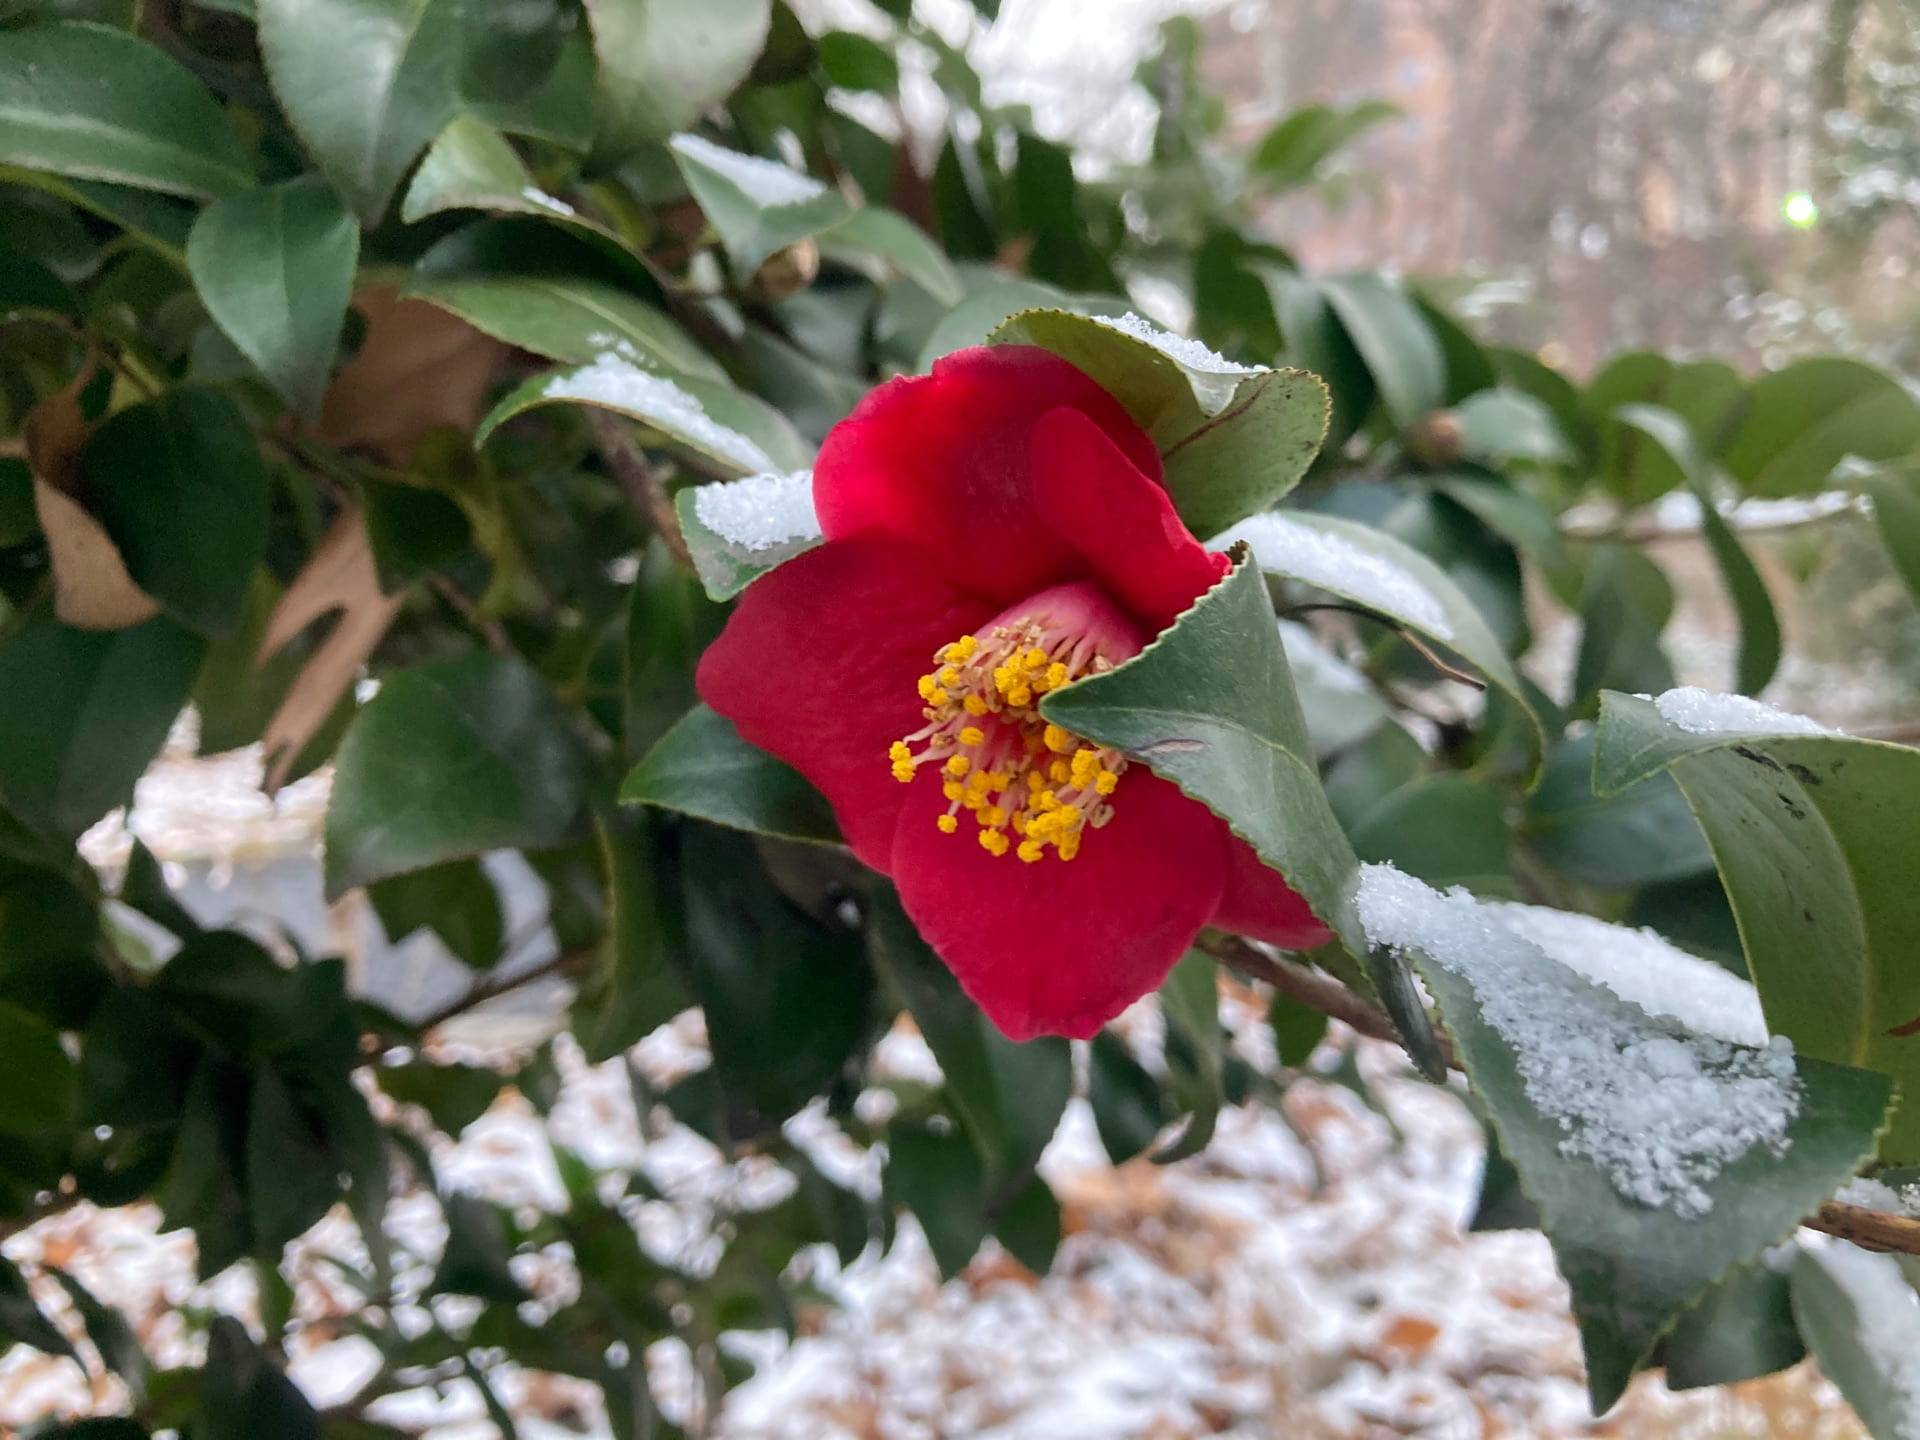 We haven't had much snow this winter, but what little is there looks beautiful dusting the first Camellia japonica flowers.